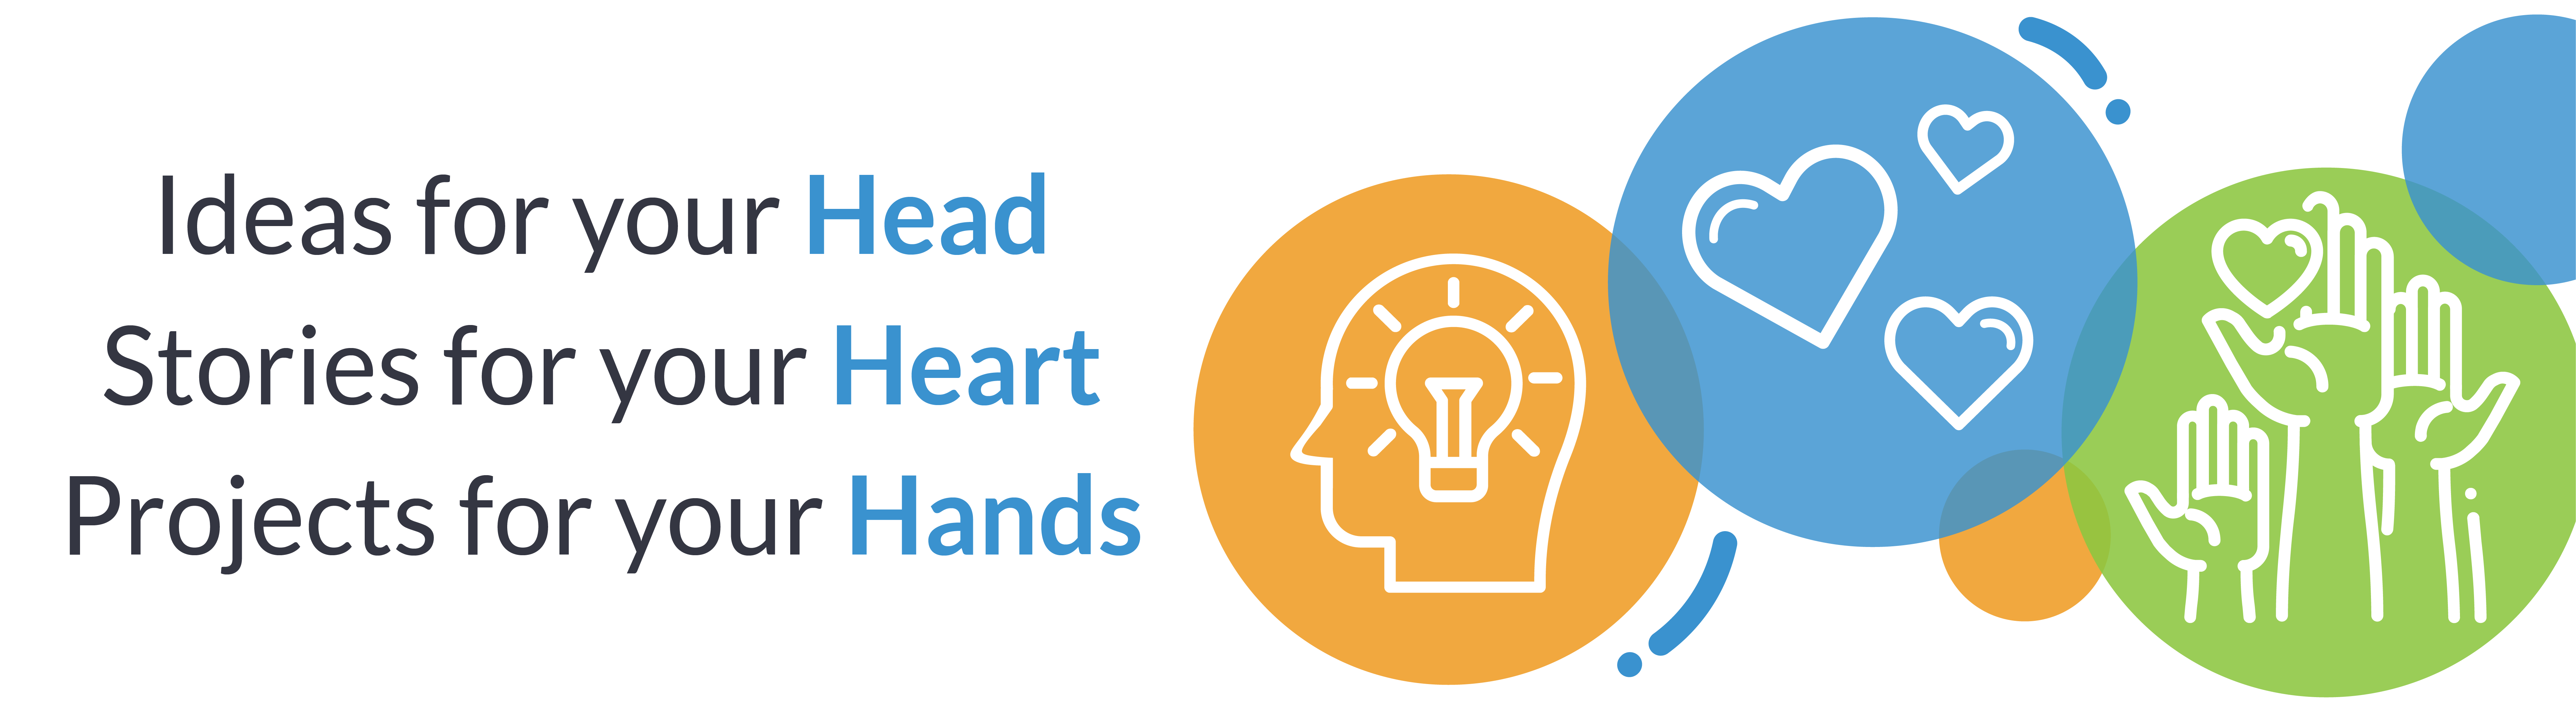 Building Impact Blog- Ideas for your head, stories for your heart, projects for your hands